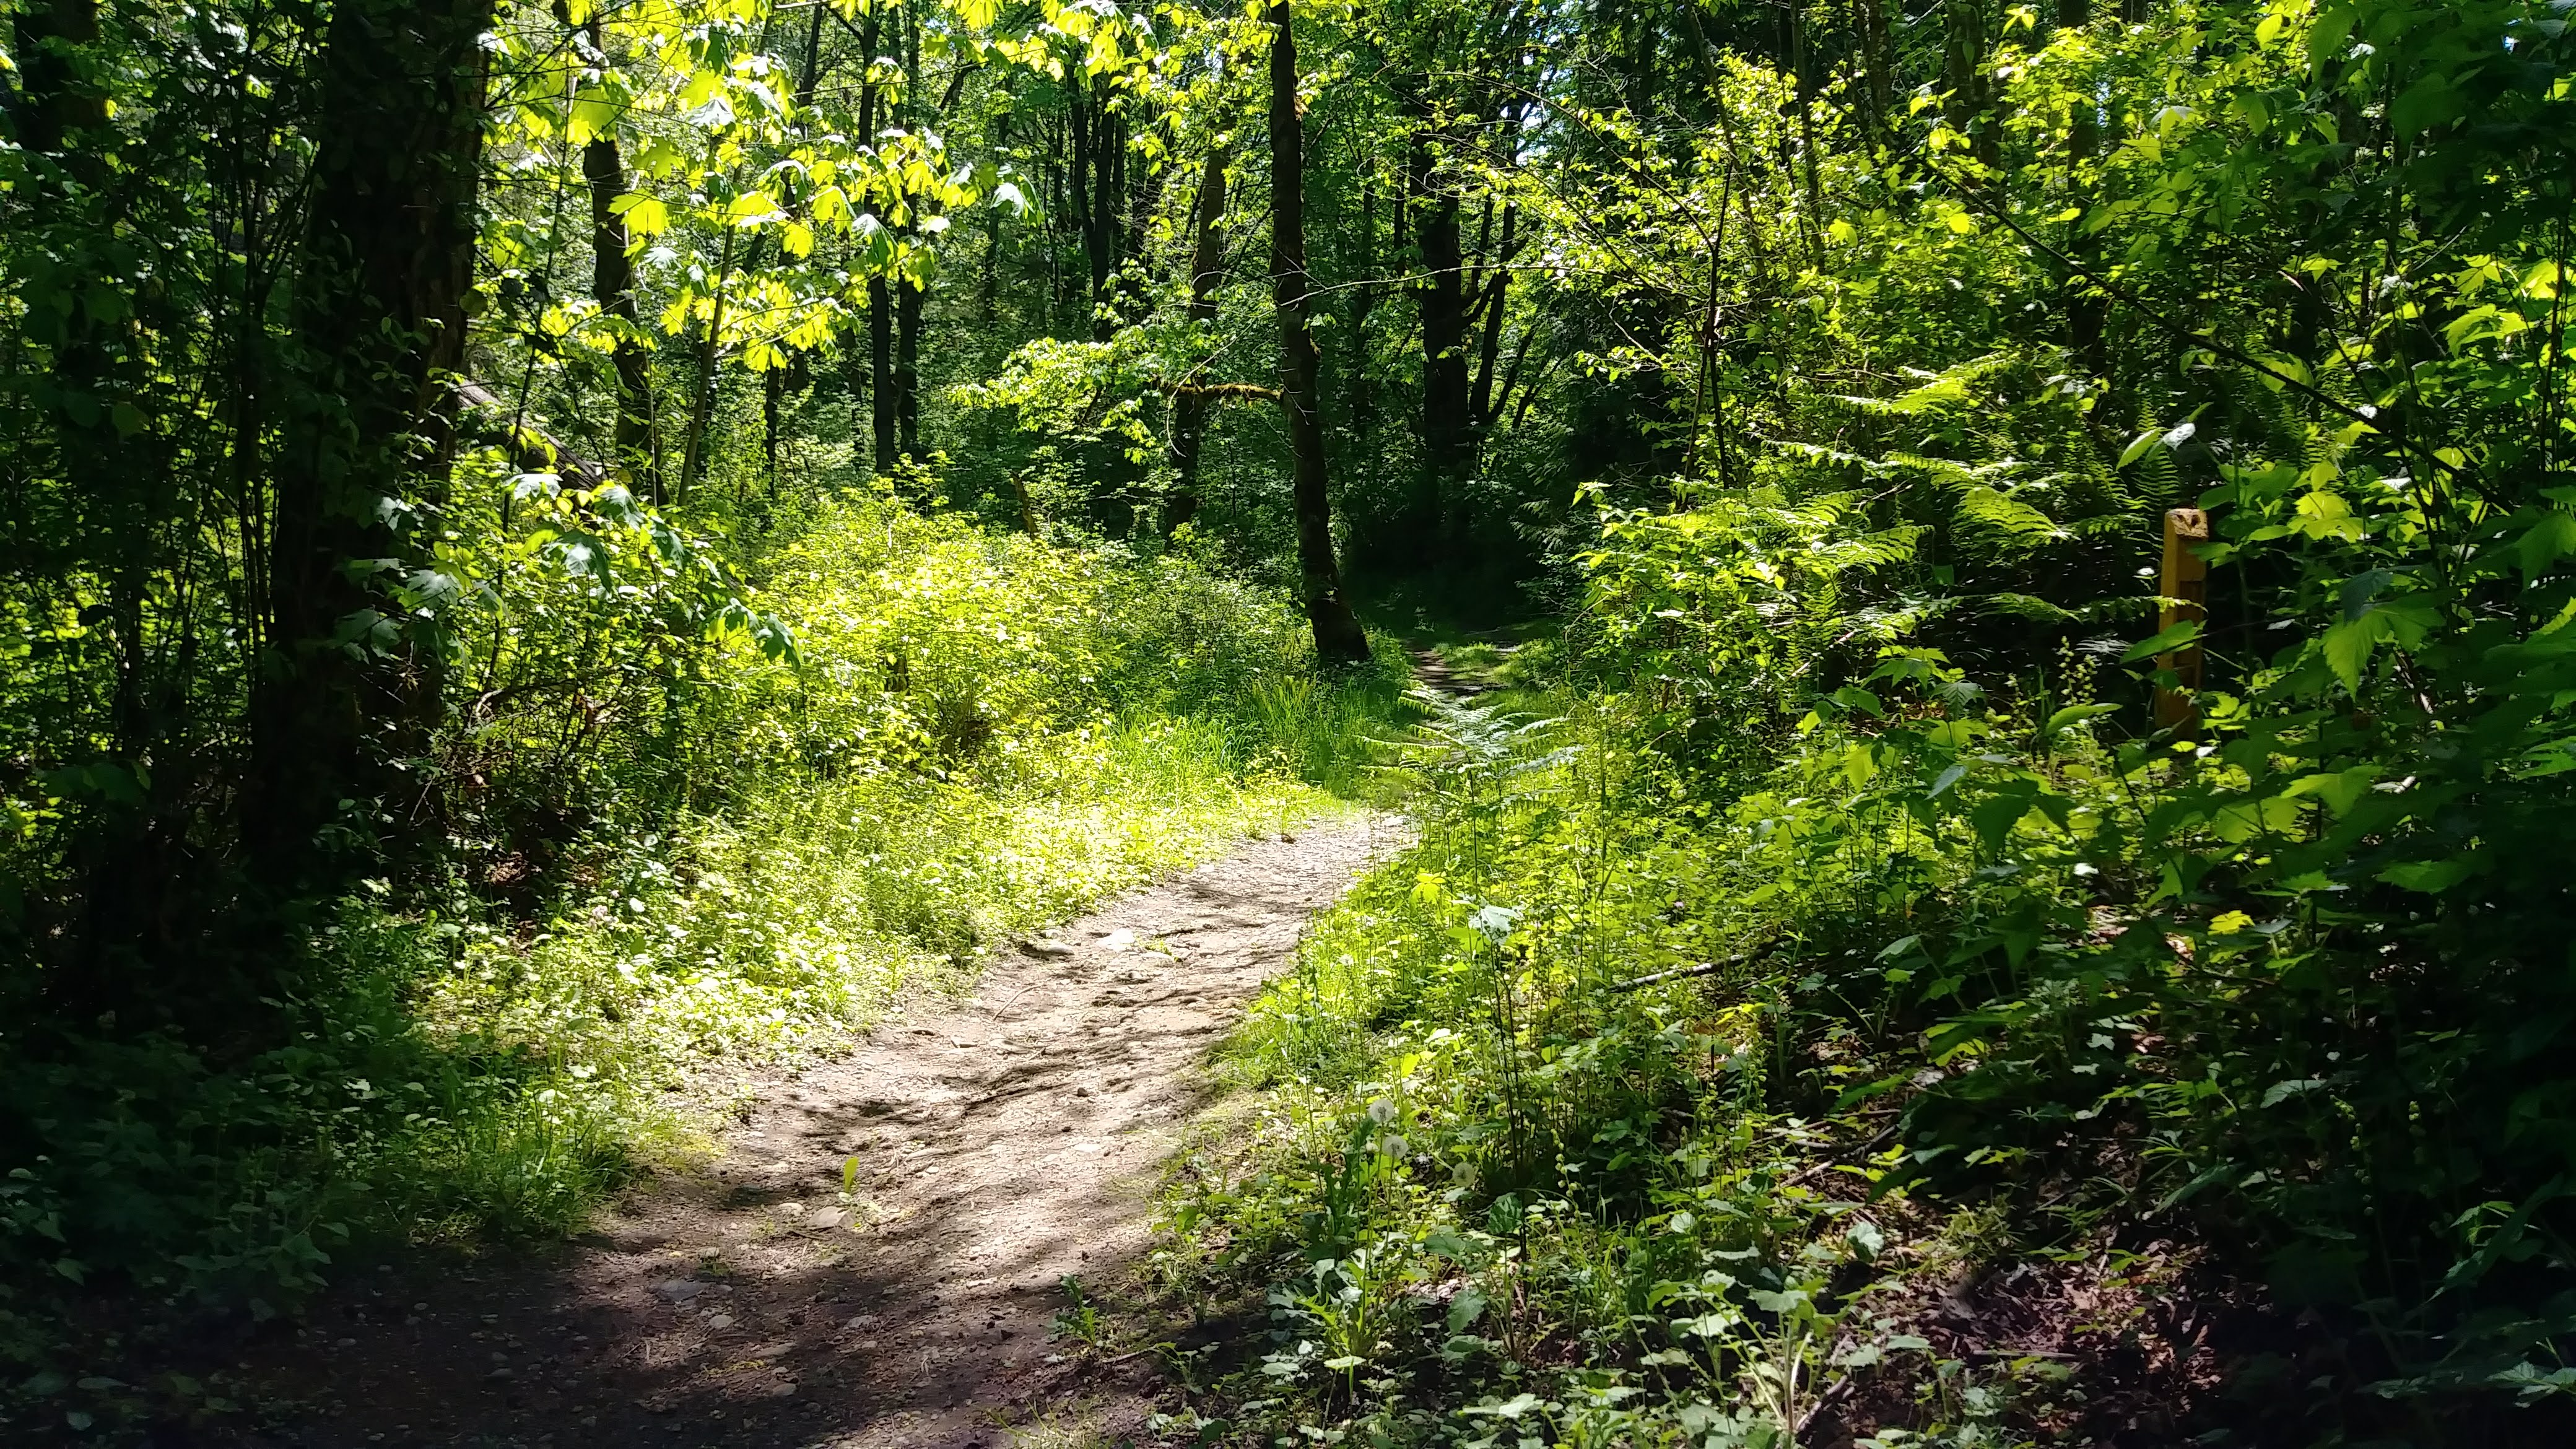 ../images/trails/highlands_south//Trail looking south from the SE 93rd St cul-de-sac.jpg